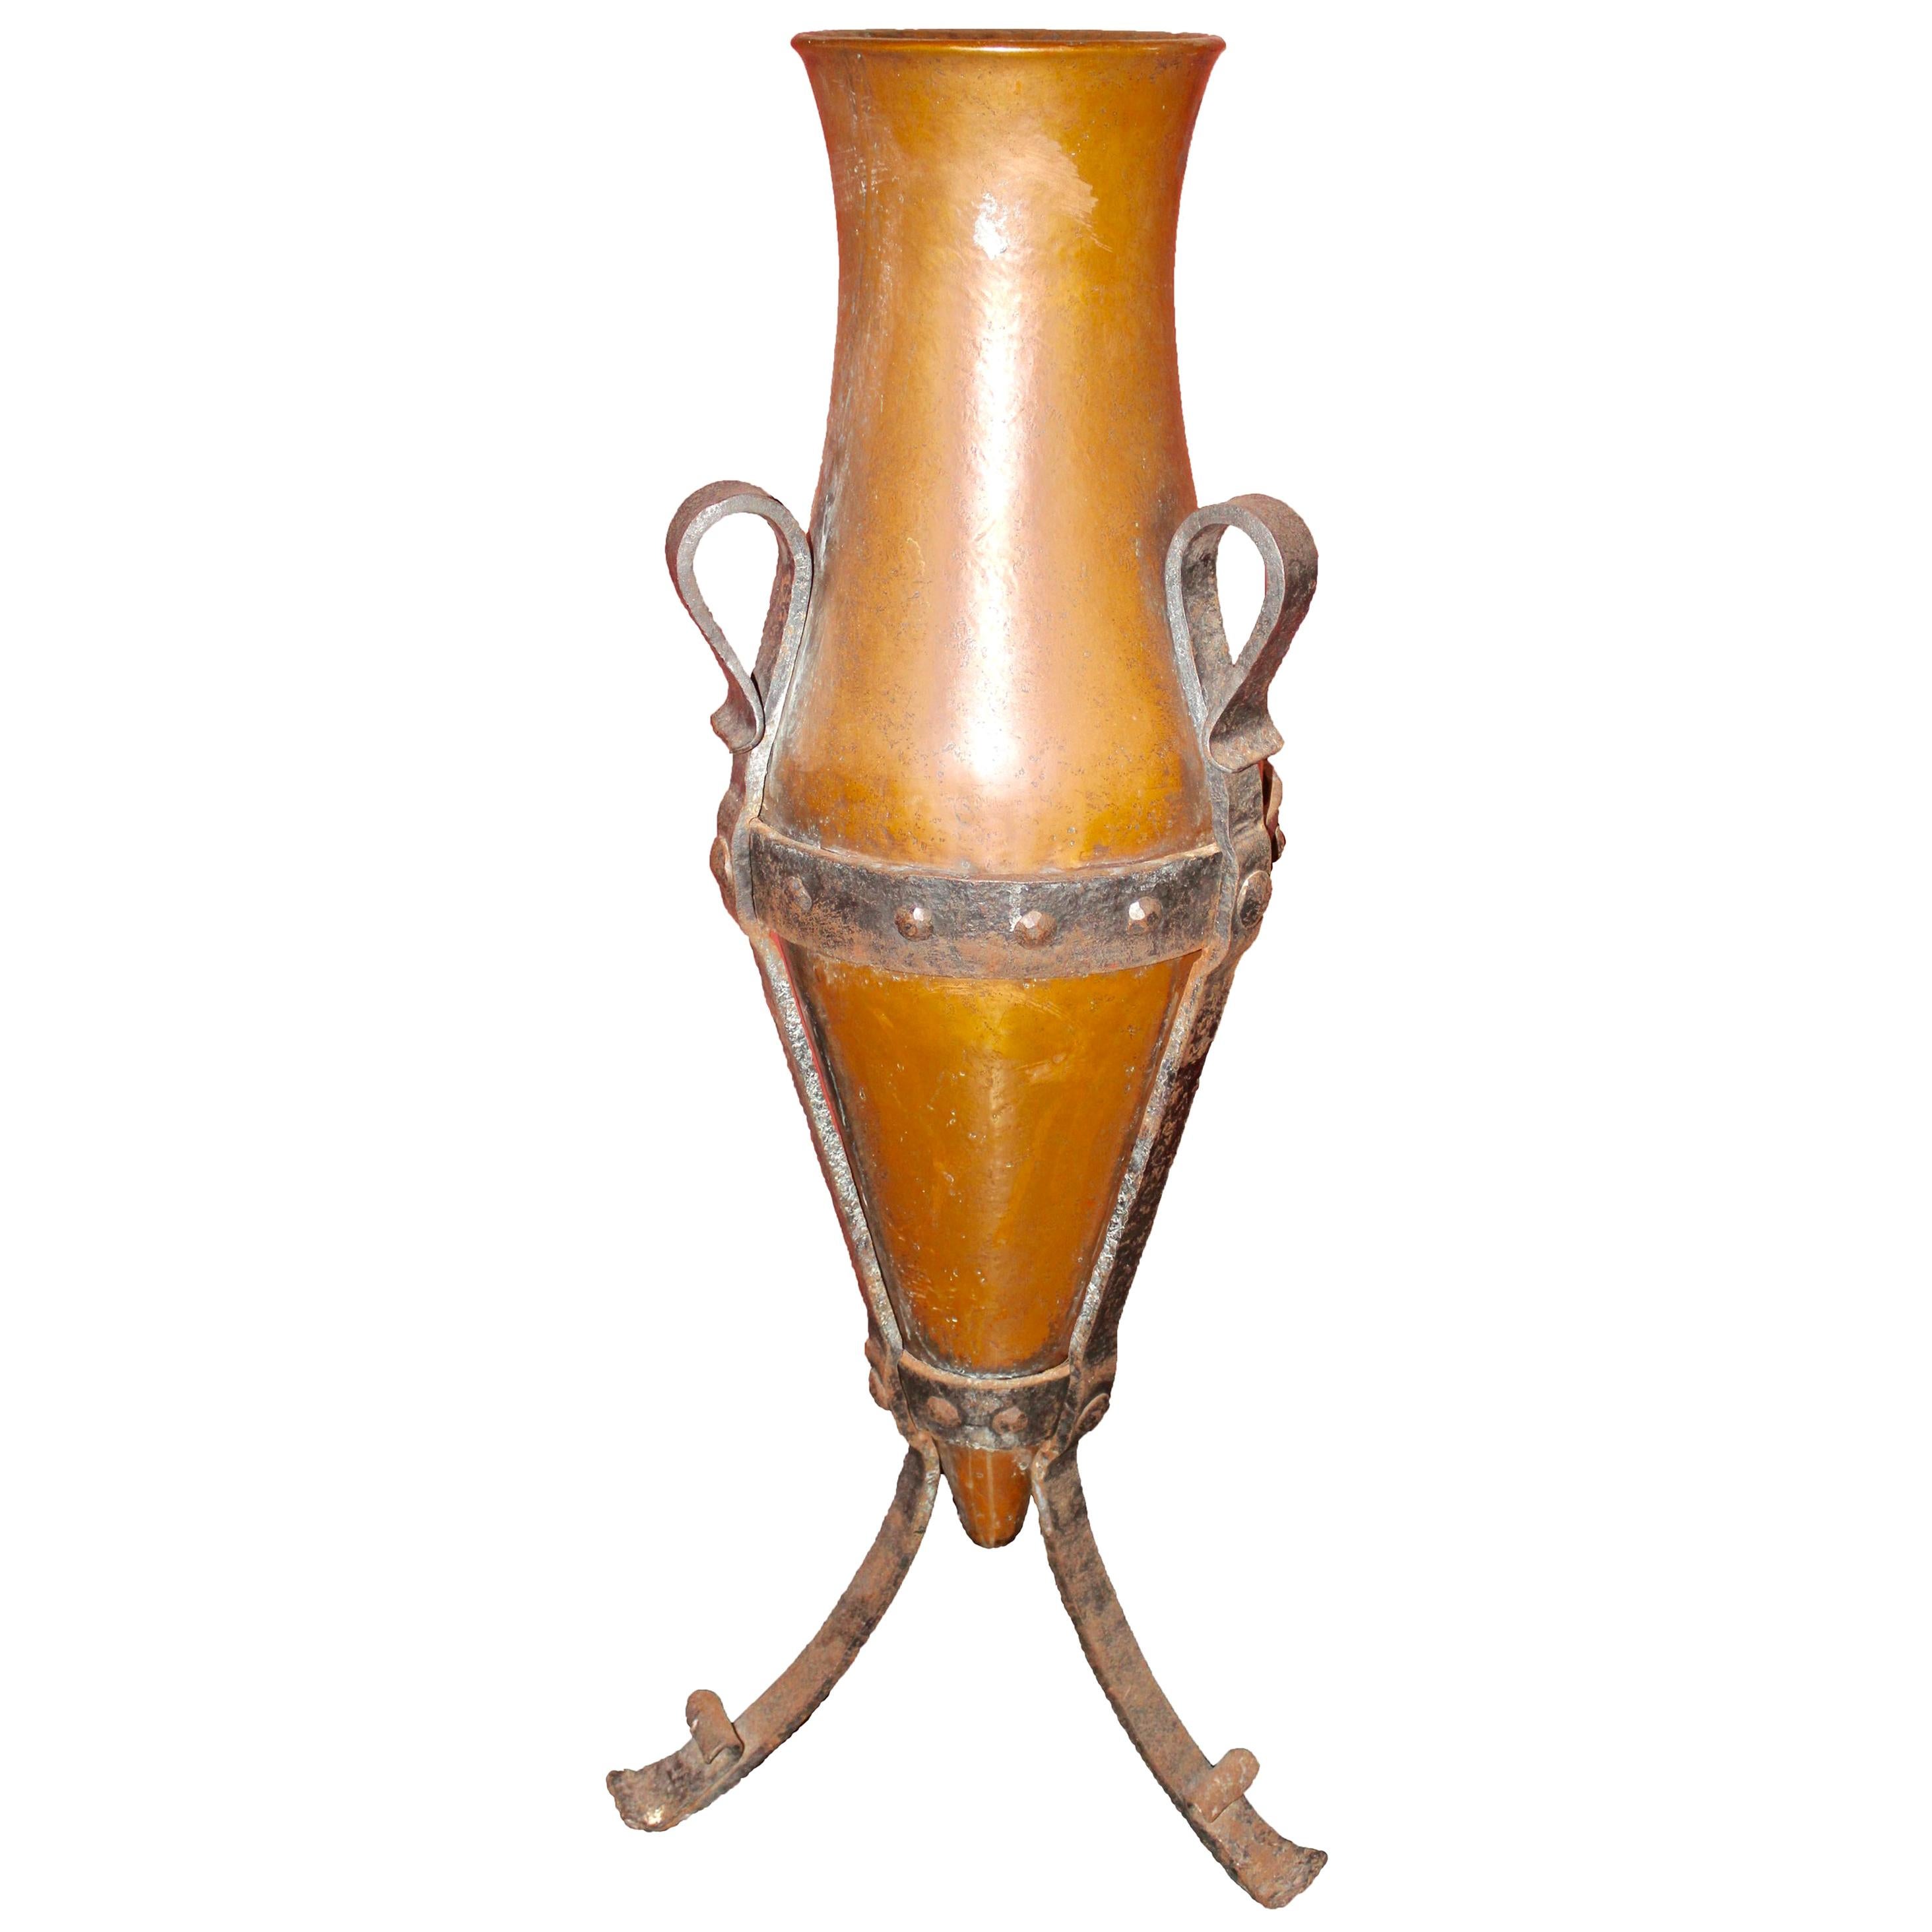 19th Century French Copper Urn with a Forged Base and Very Decorative